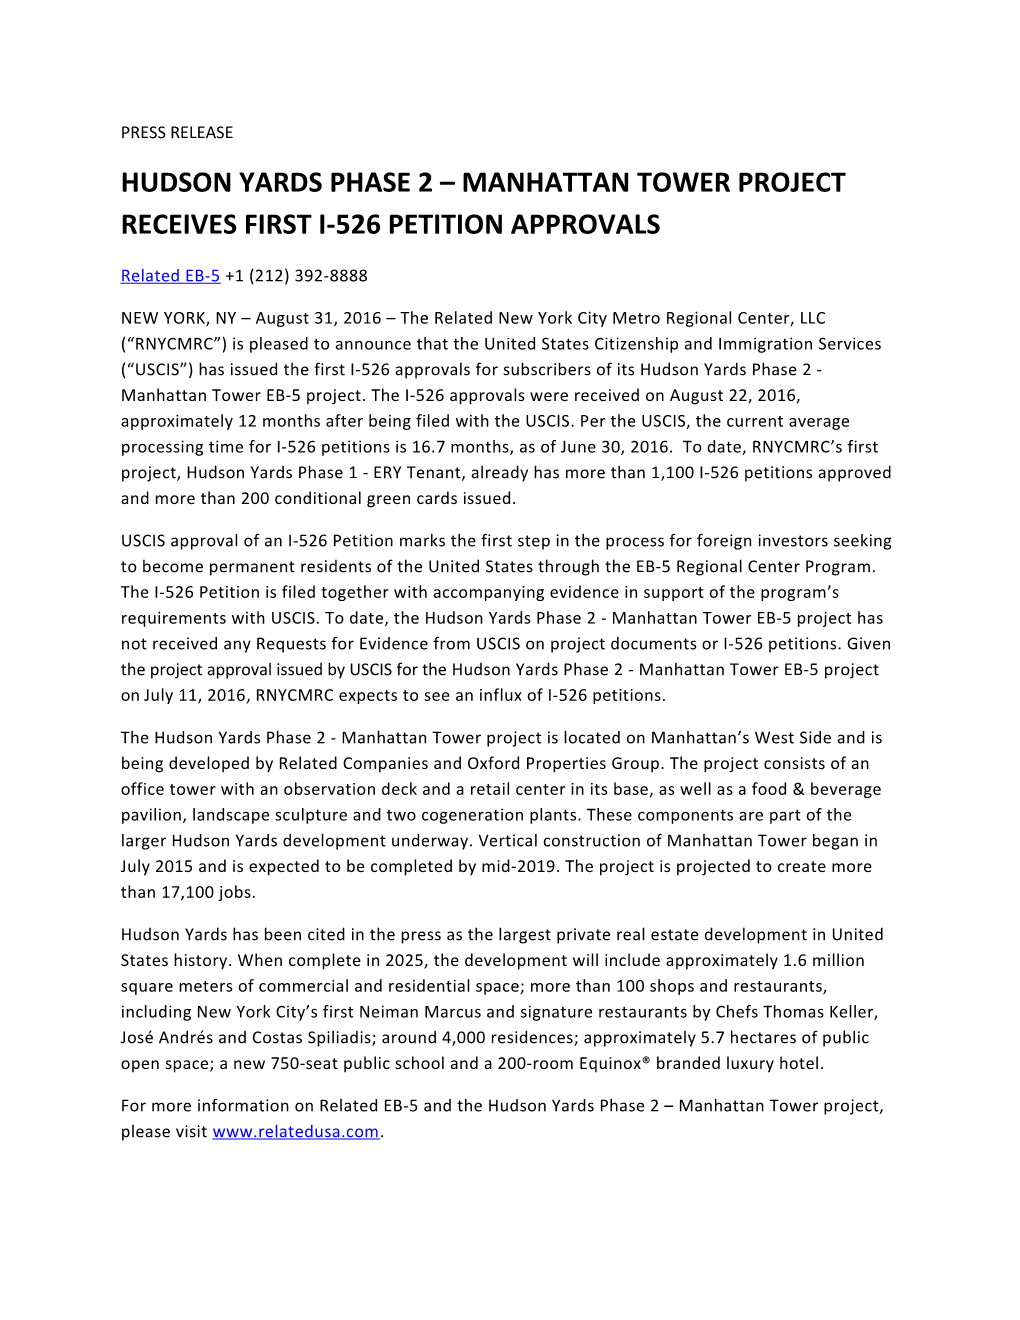 Hudson Yards Phase 2 Manhattan Tower Project Receives First I-526Petition Approvals